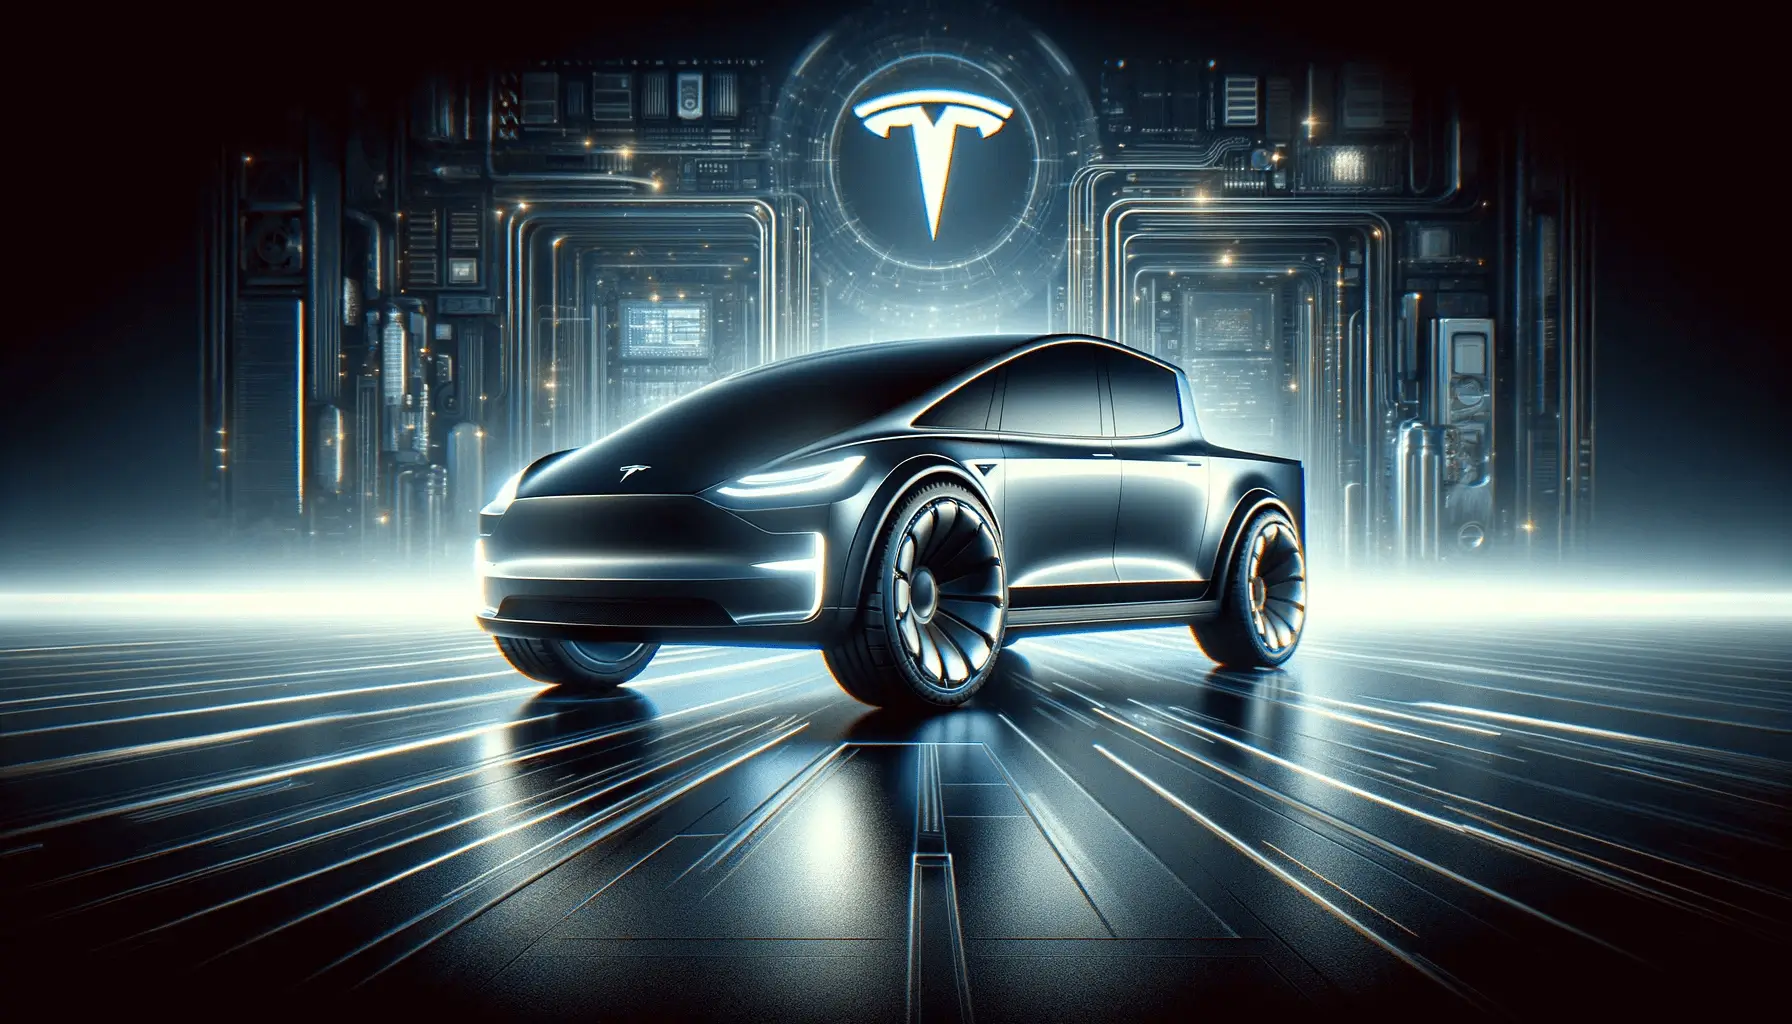 Futuristic Tesla Cybertruck equipped with innovative aero wheel covers, highlighting advancements in electric vehicle efficiency and design, set against a modern, technological background.